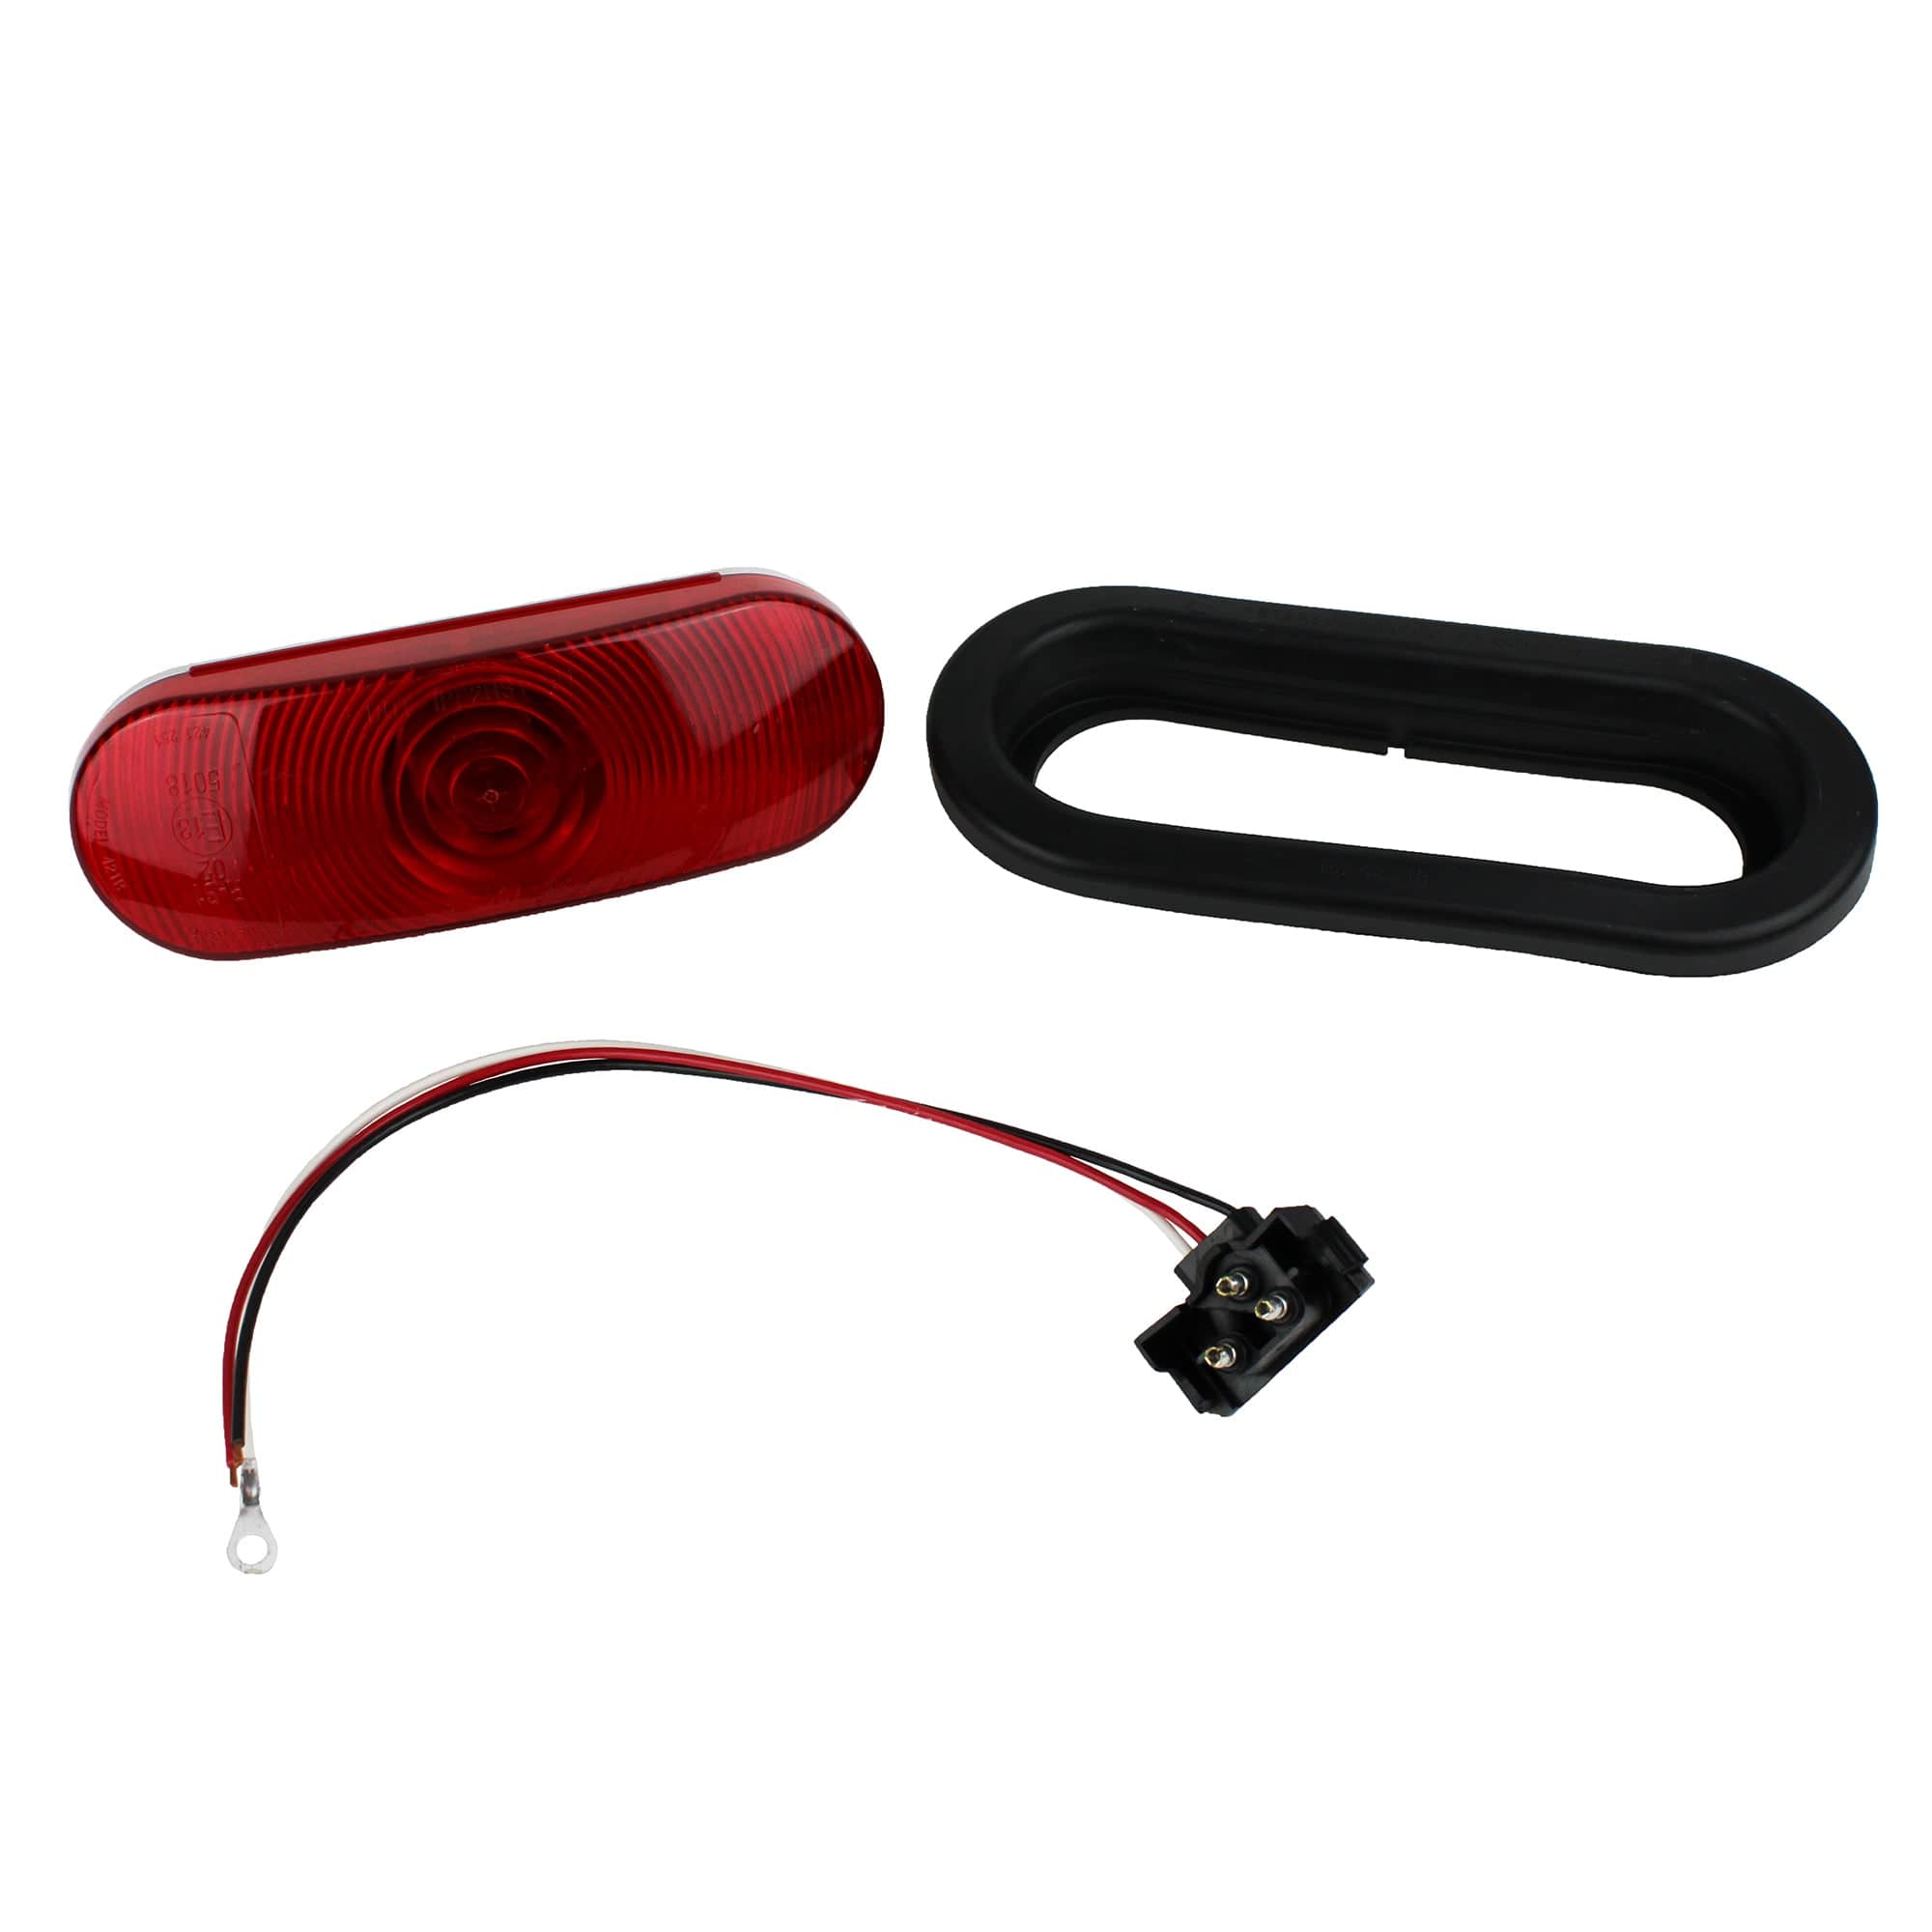 Anderson Marine 421KR Incandescent Stop/Turn/Tail Oval Light – Red